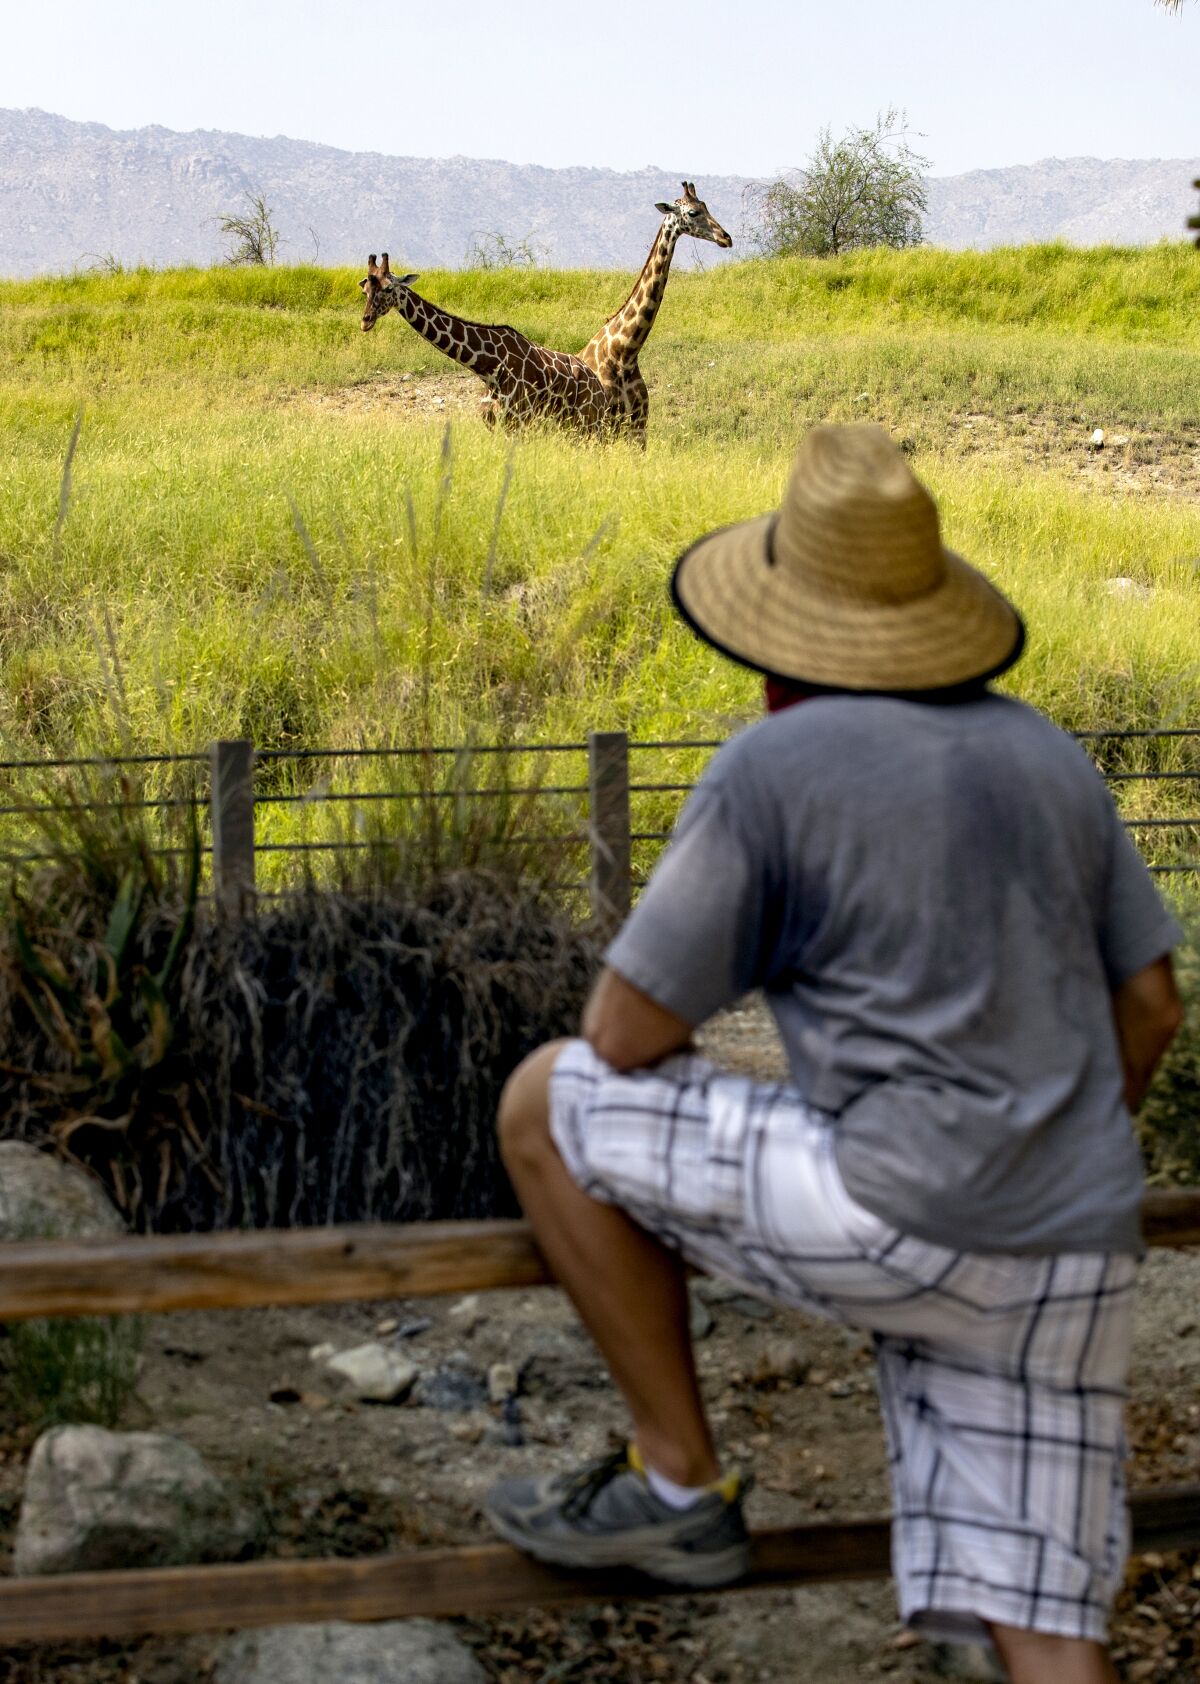 A visitor gets a close-up view of two giraffes at the Living Desert Zoo and Gardens in Palm Desert.